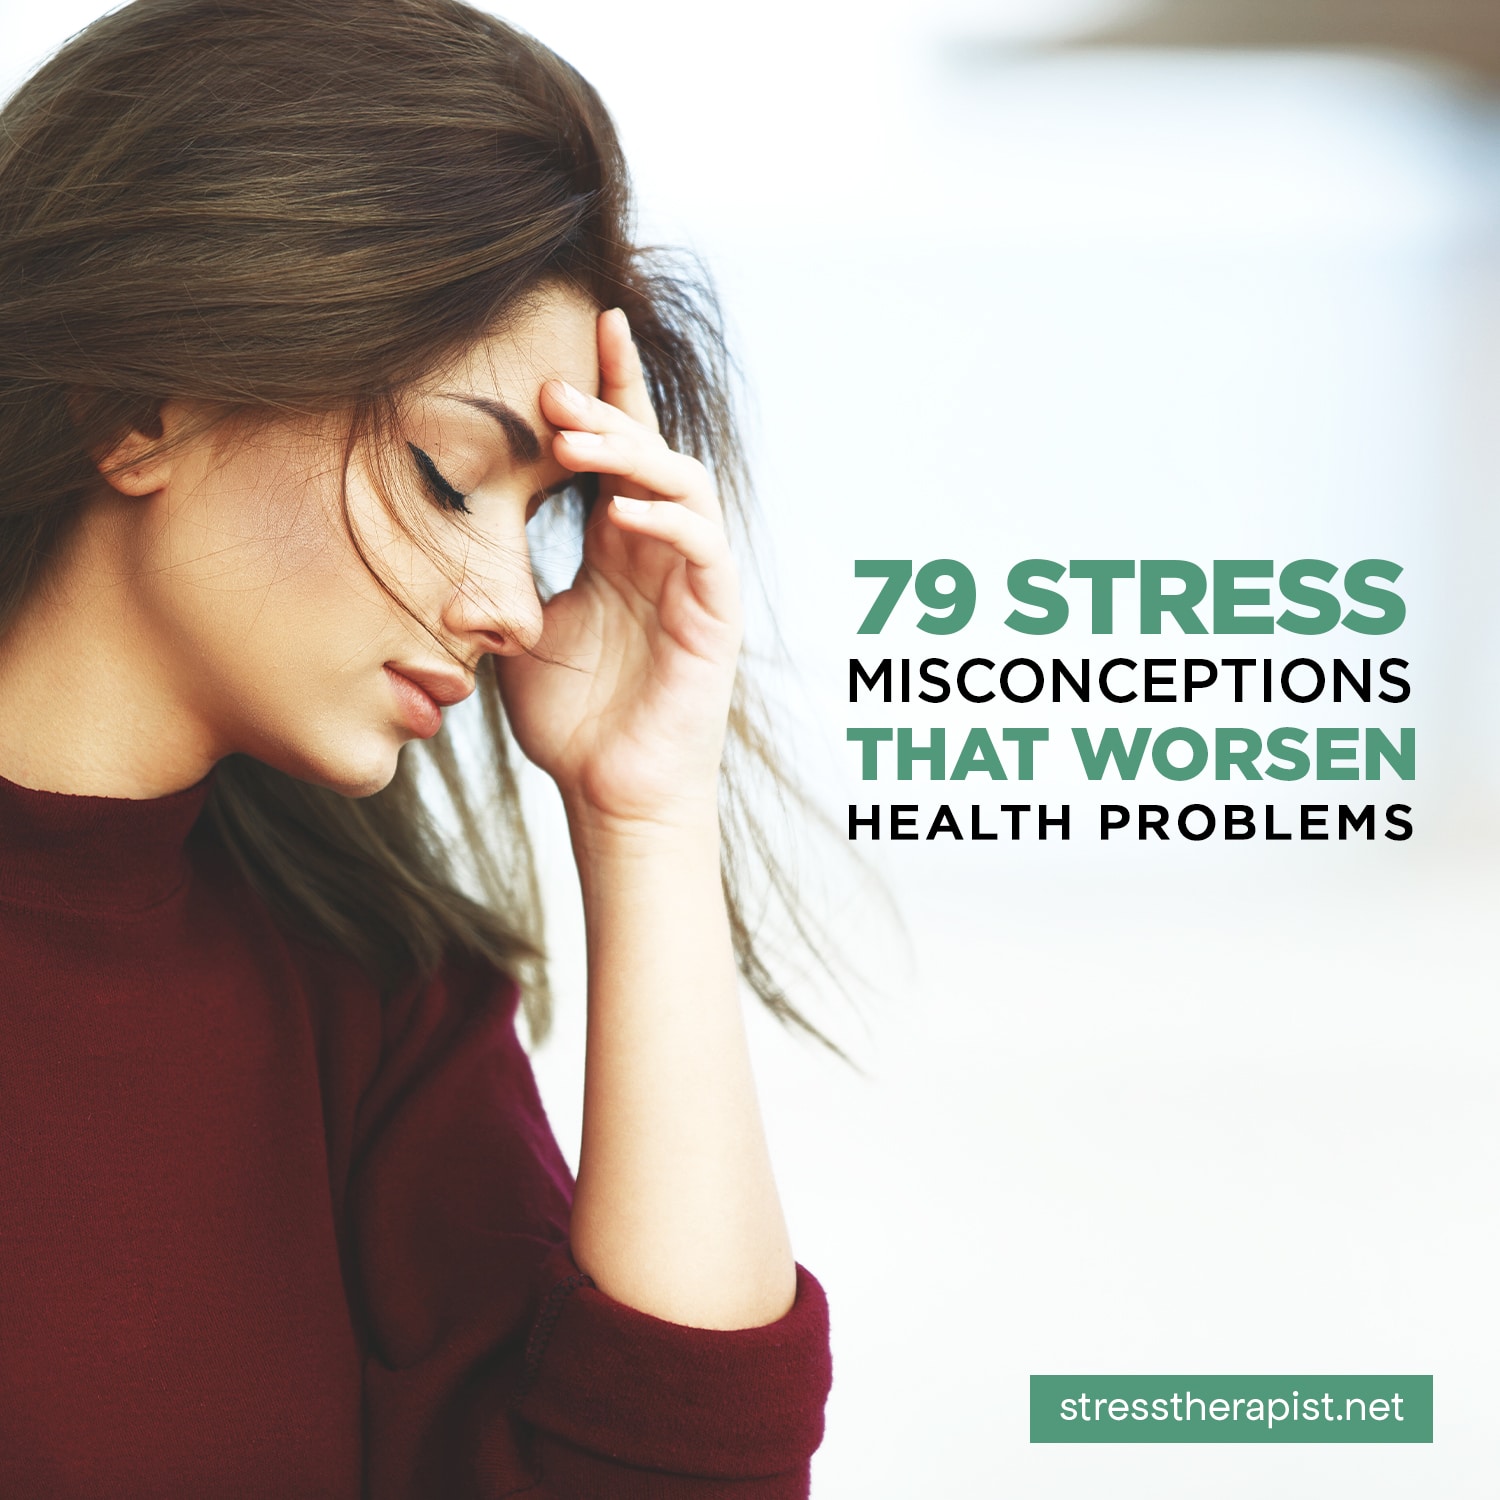 79 misconceptions about stress that promote mental health problems